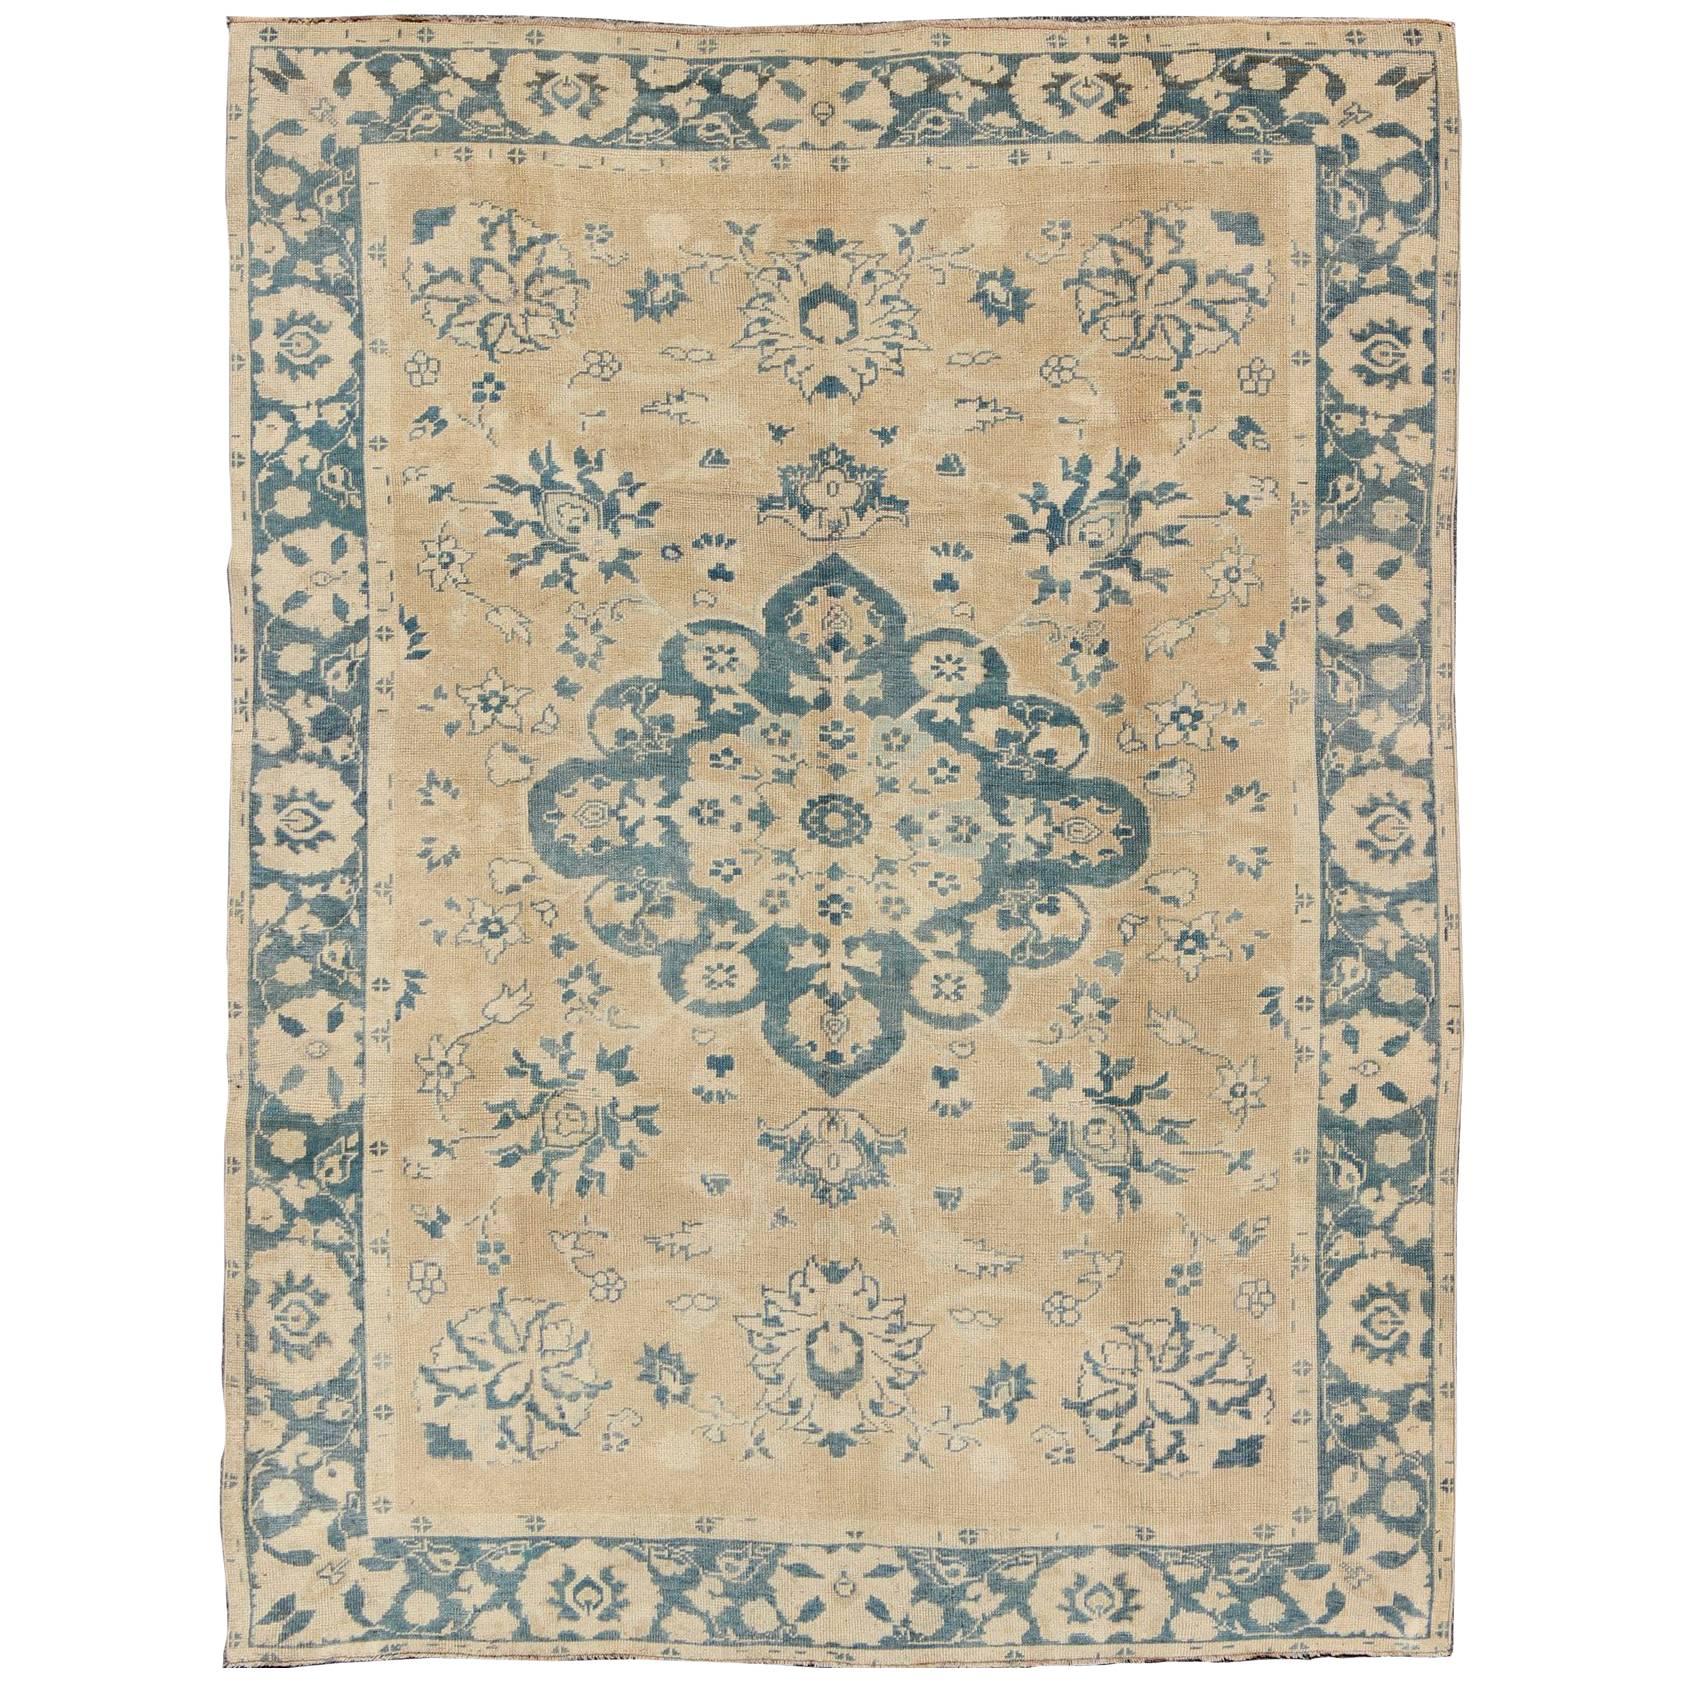 Vintage Turkish Oushak Rug in Cream and Blue